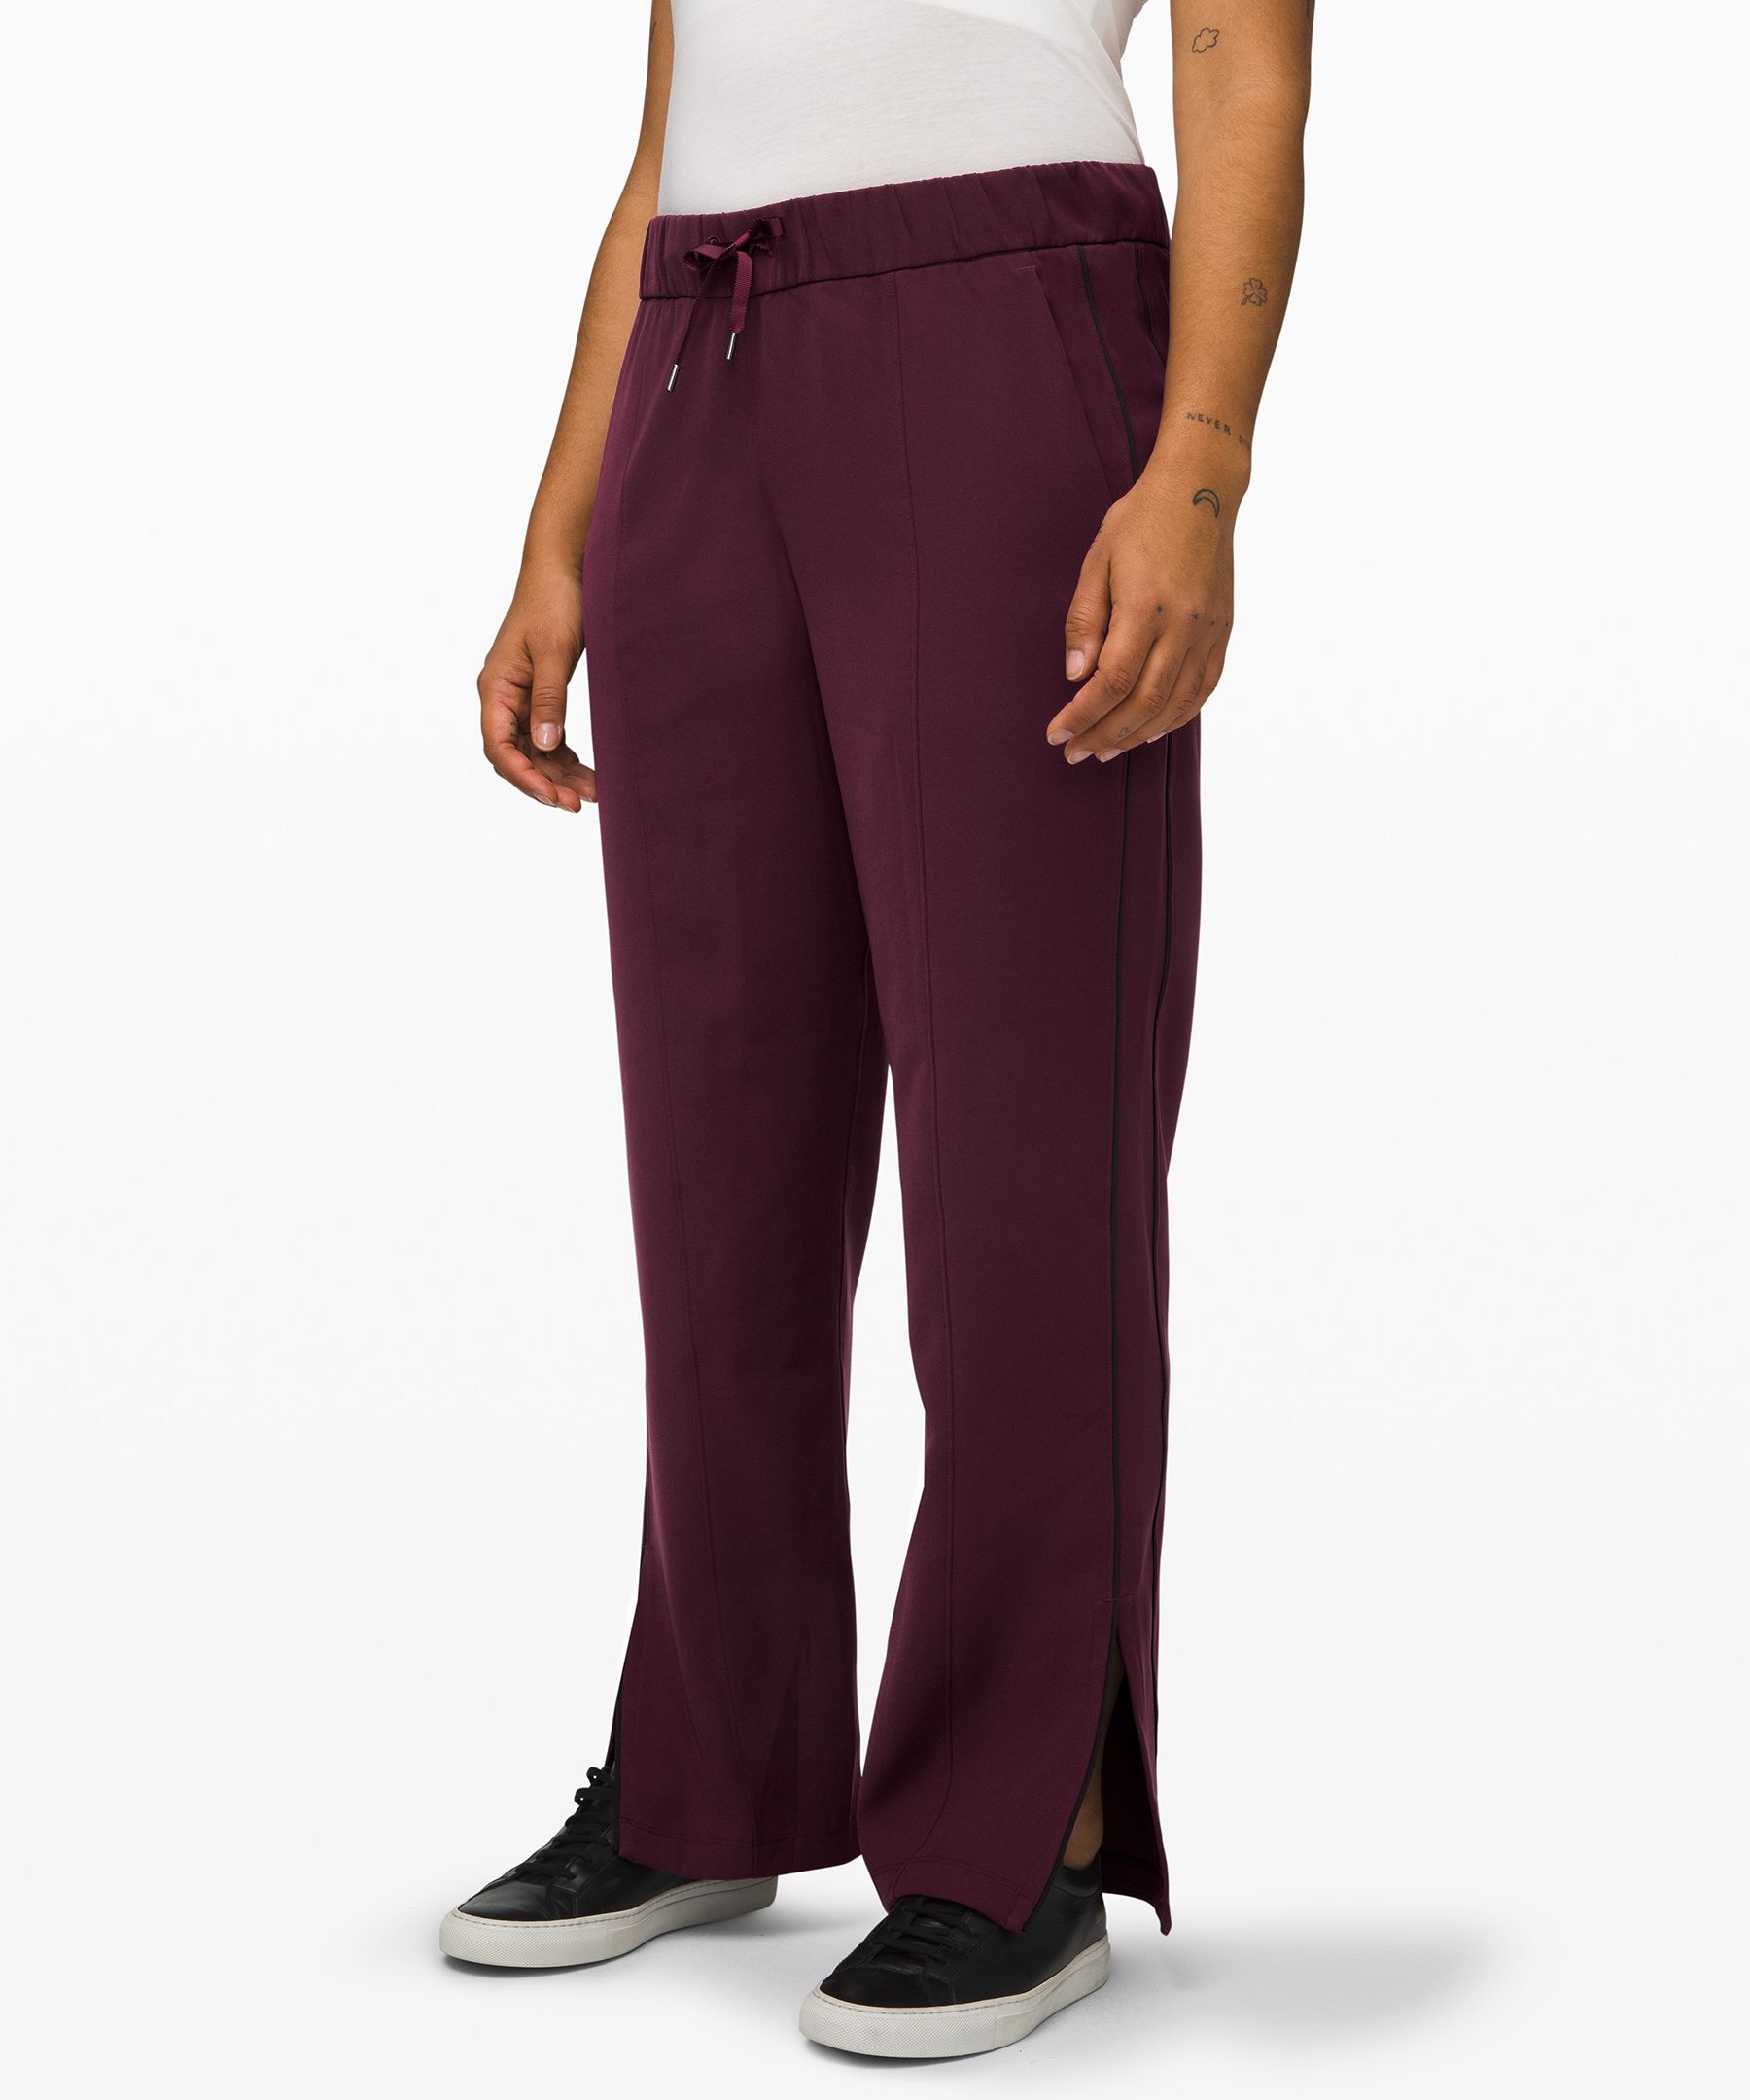 on the right track pant lululemon